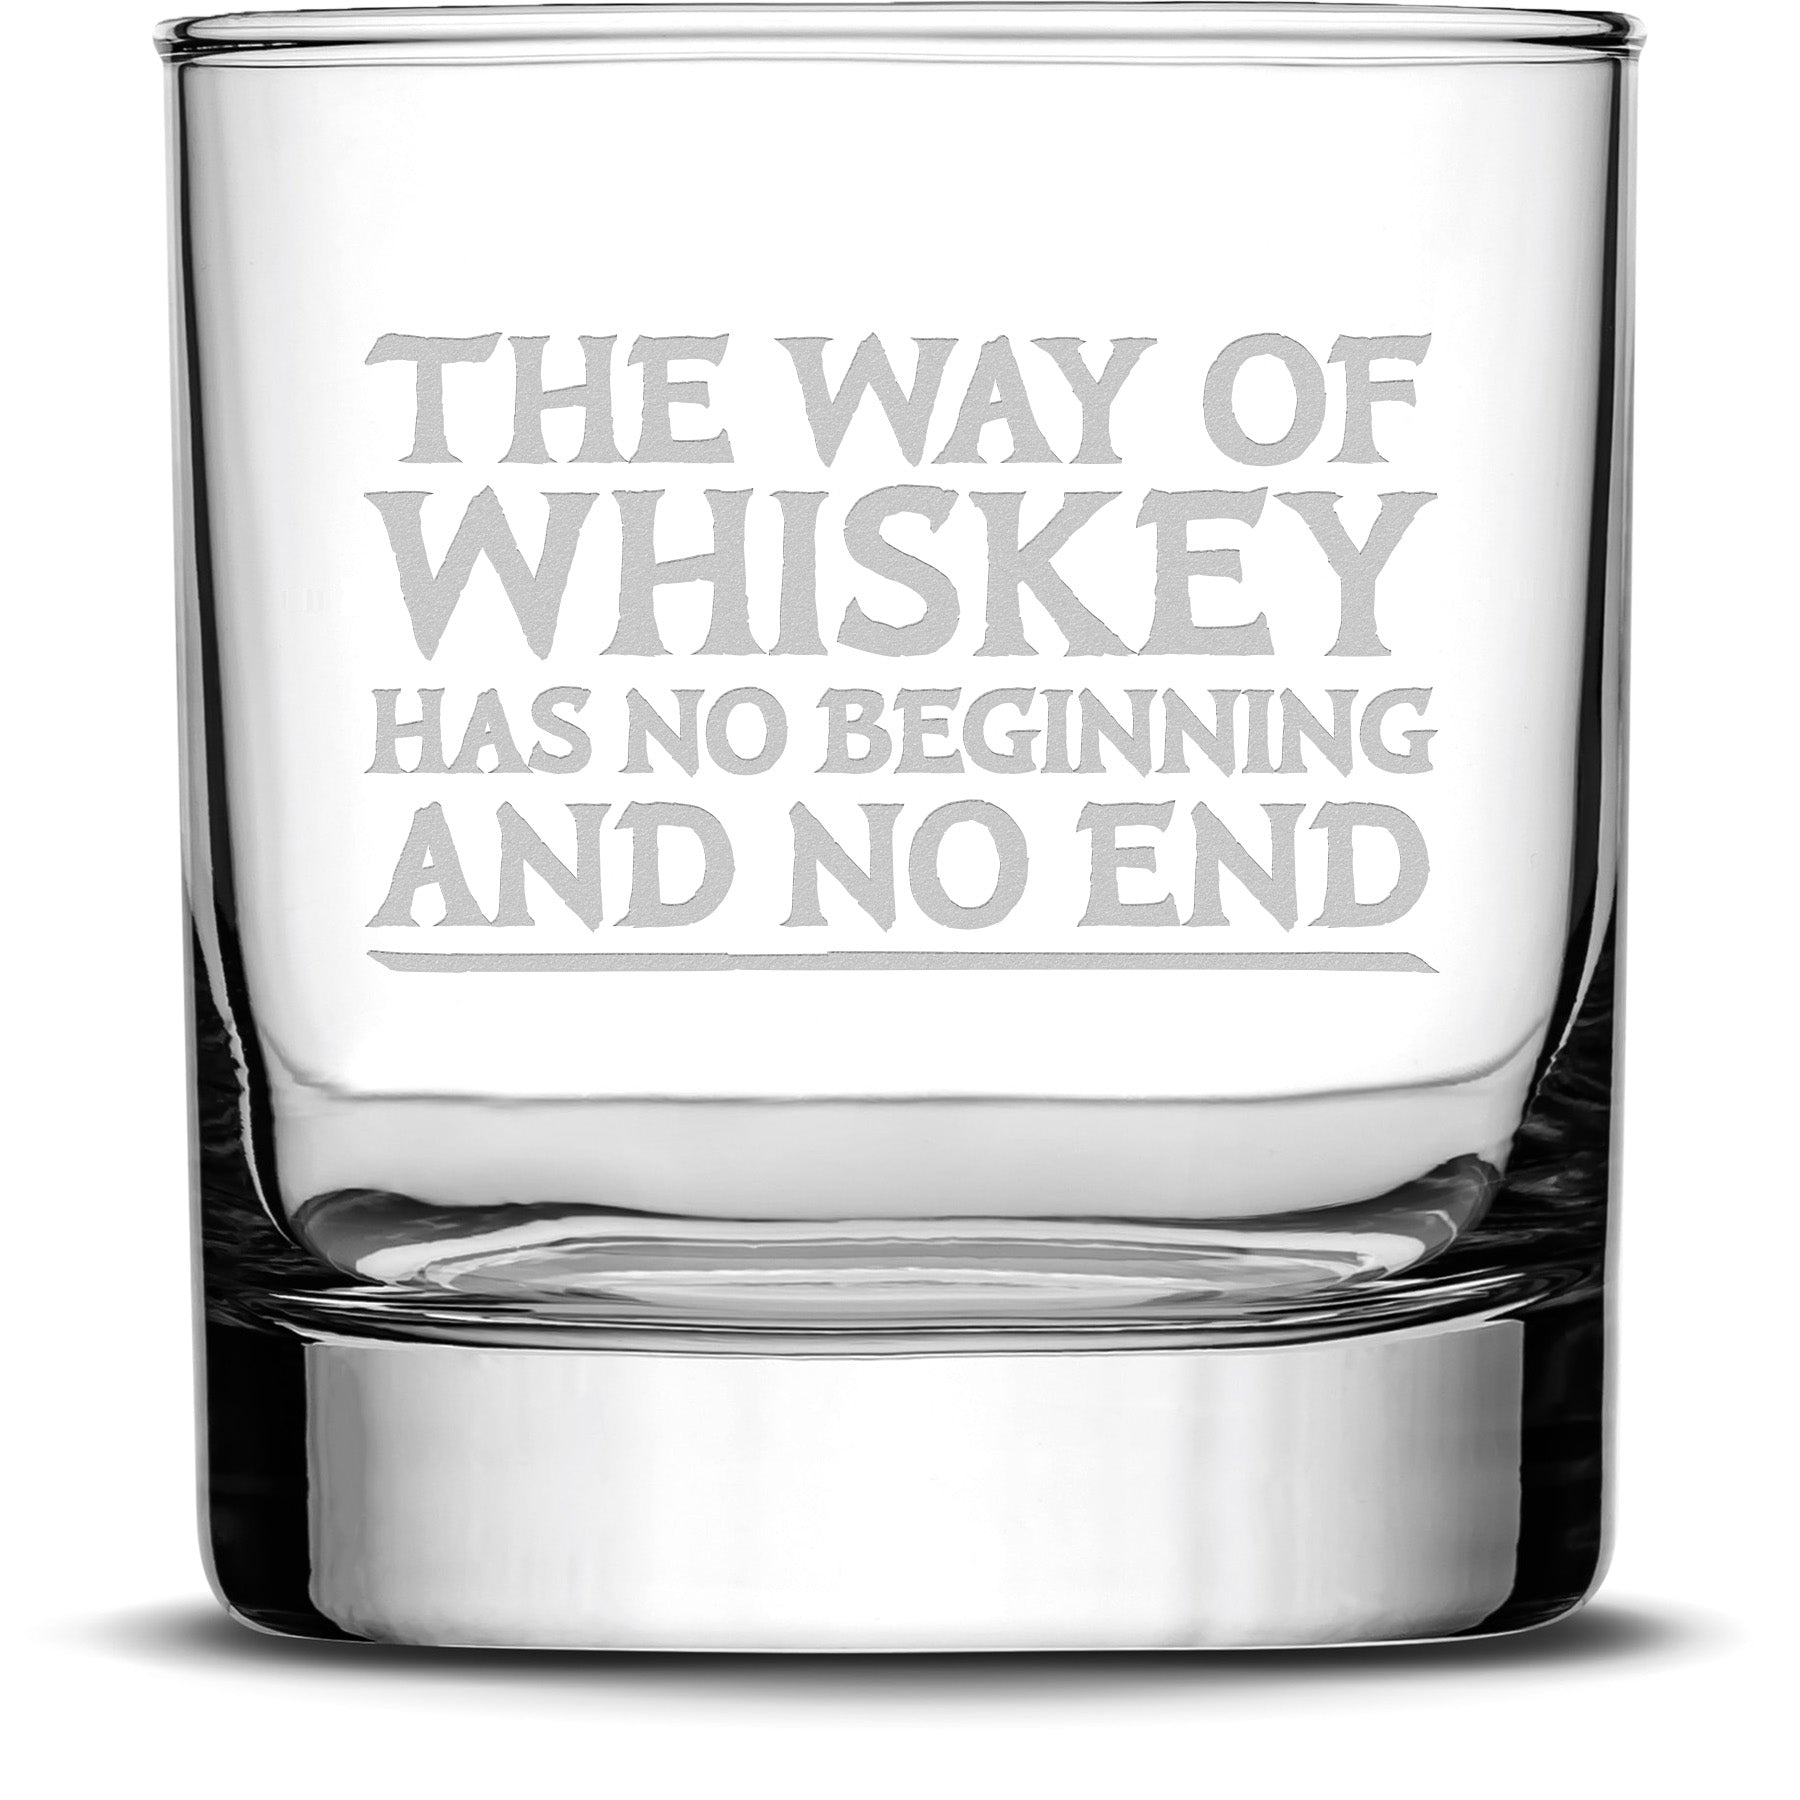 Premium Whiskey Glass, Avatar Way of Whiskey, 11oz, Laser Etched or Hand Etched